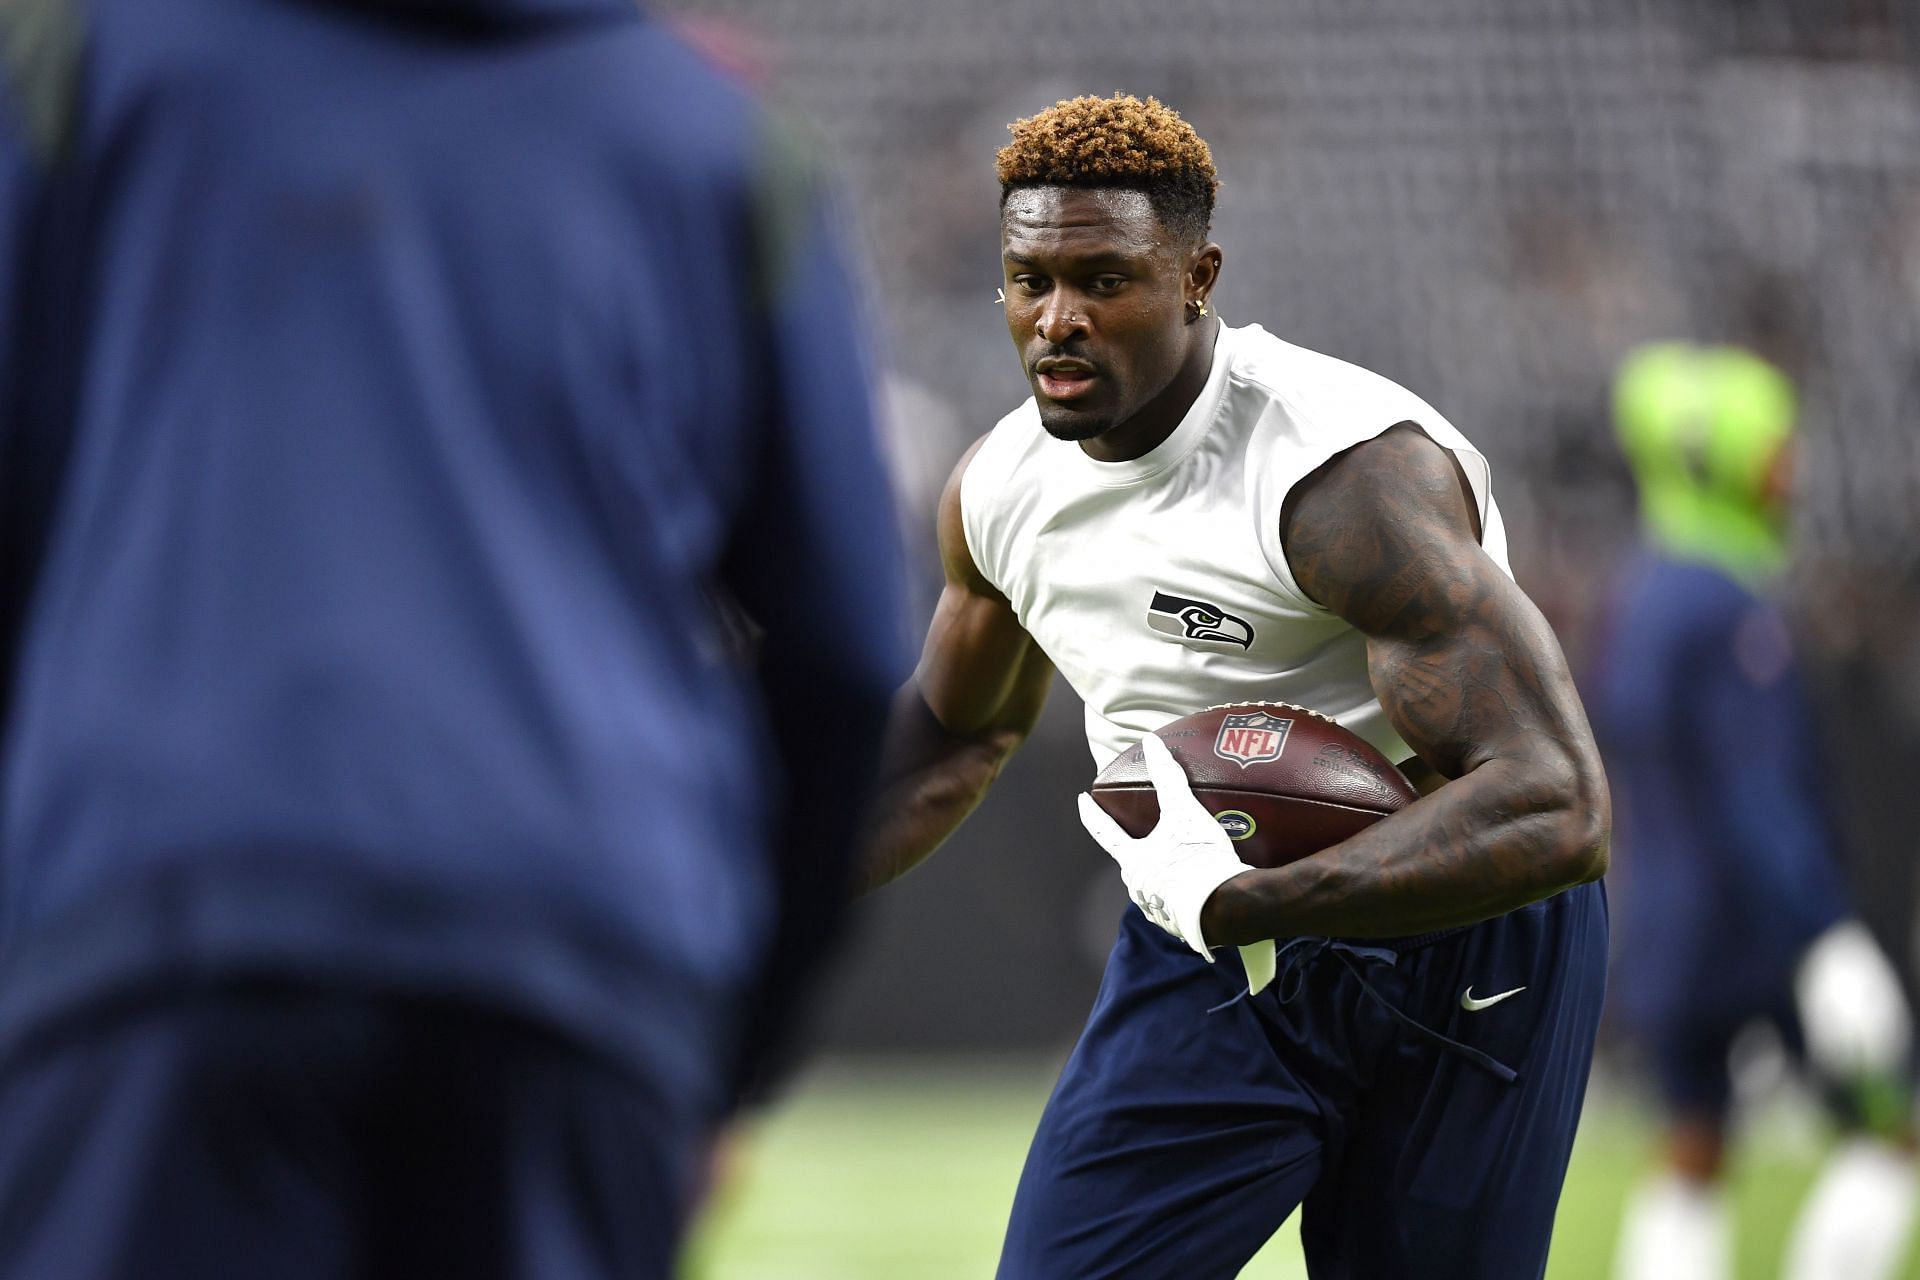 NFL star DK Metcalf diet with just one meal a day and lots of